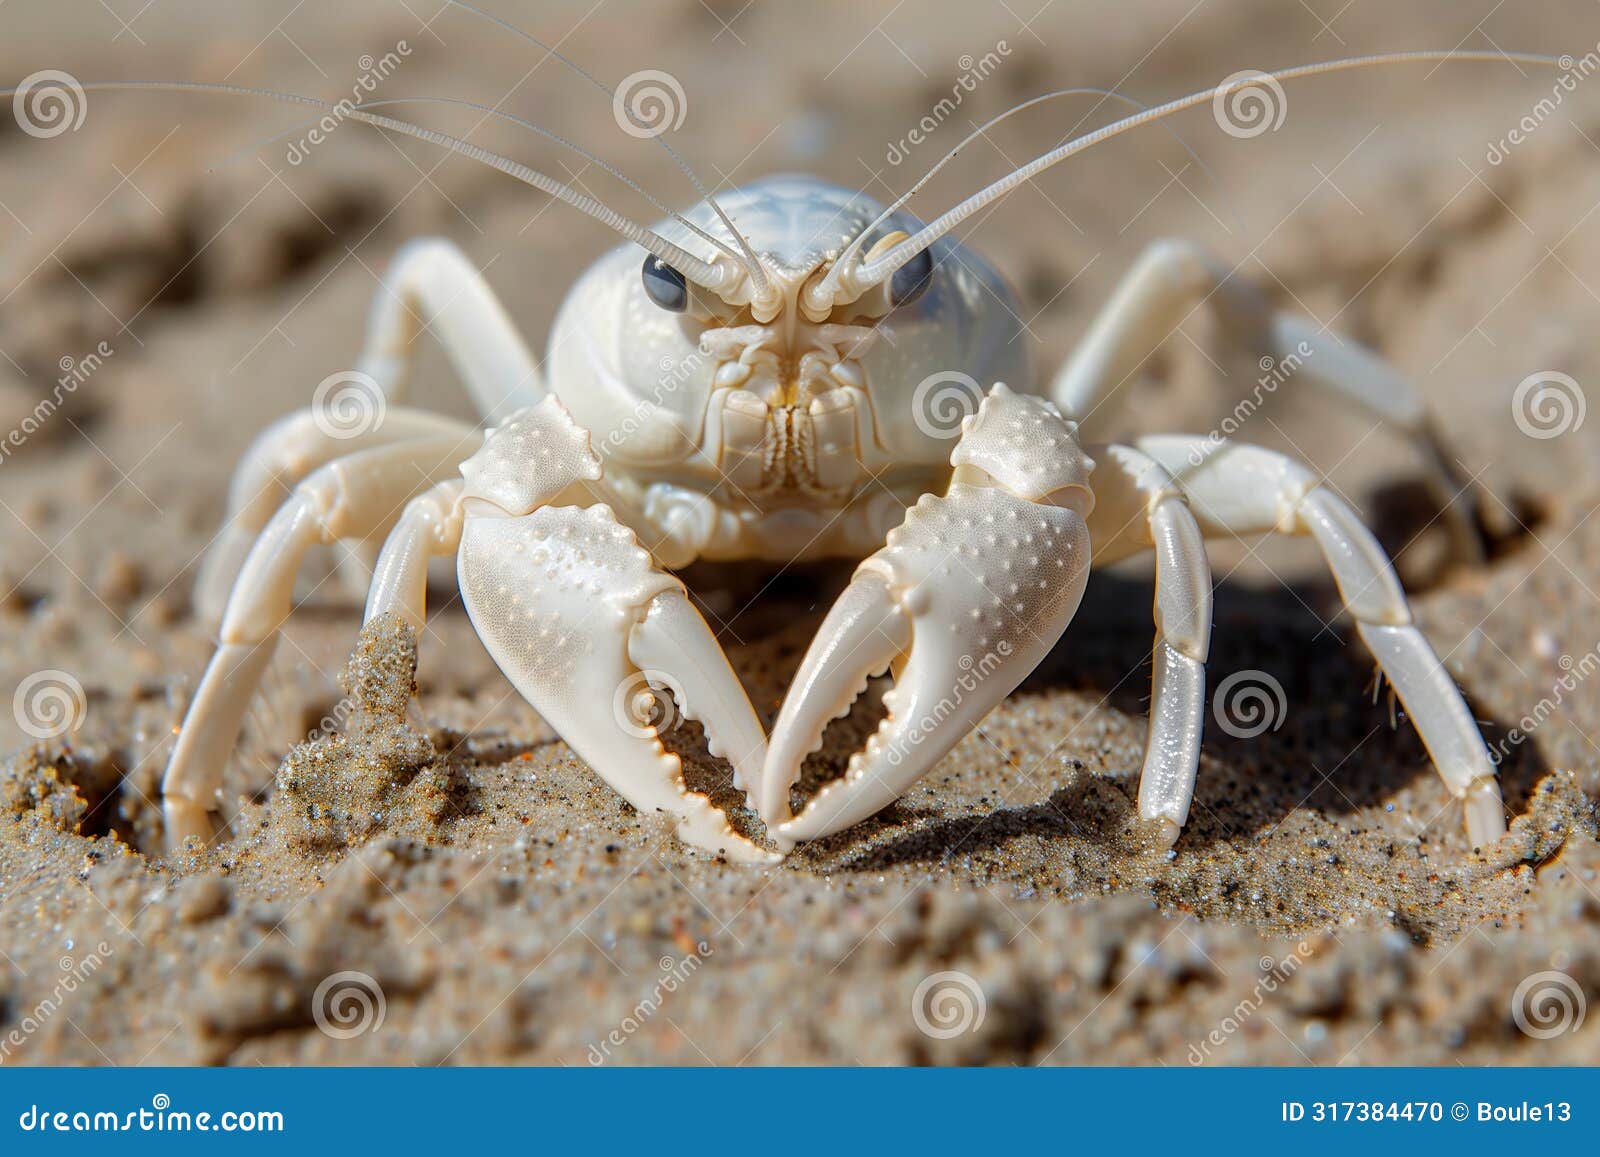 extreme close-up of a ghost crab or crustacean on a sandy beach, sunny day